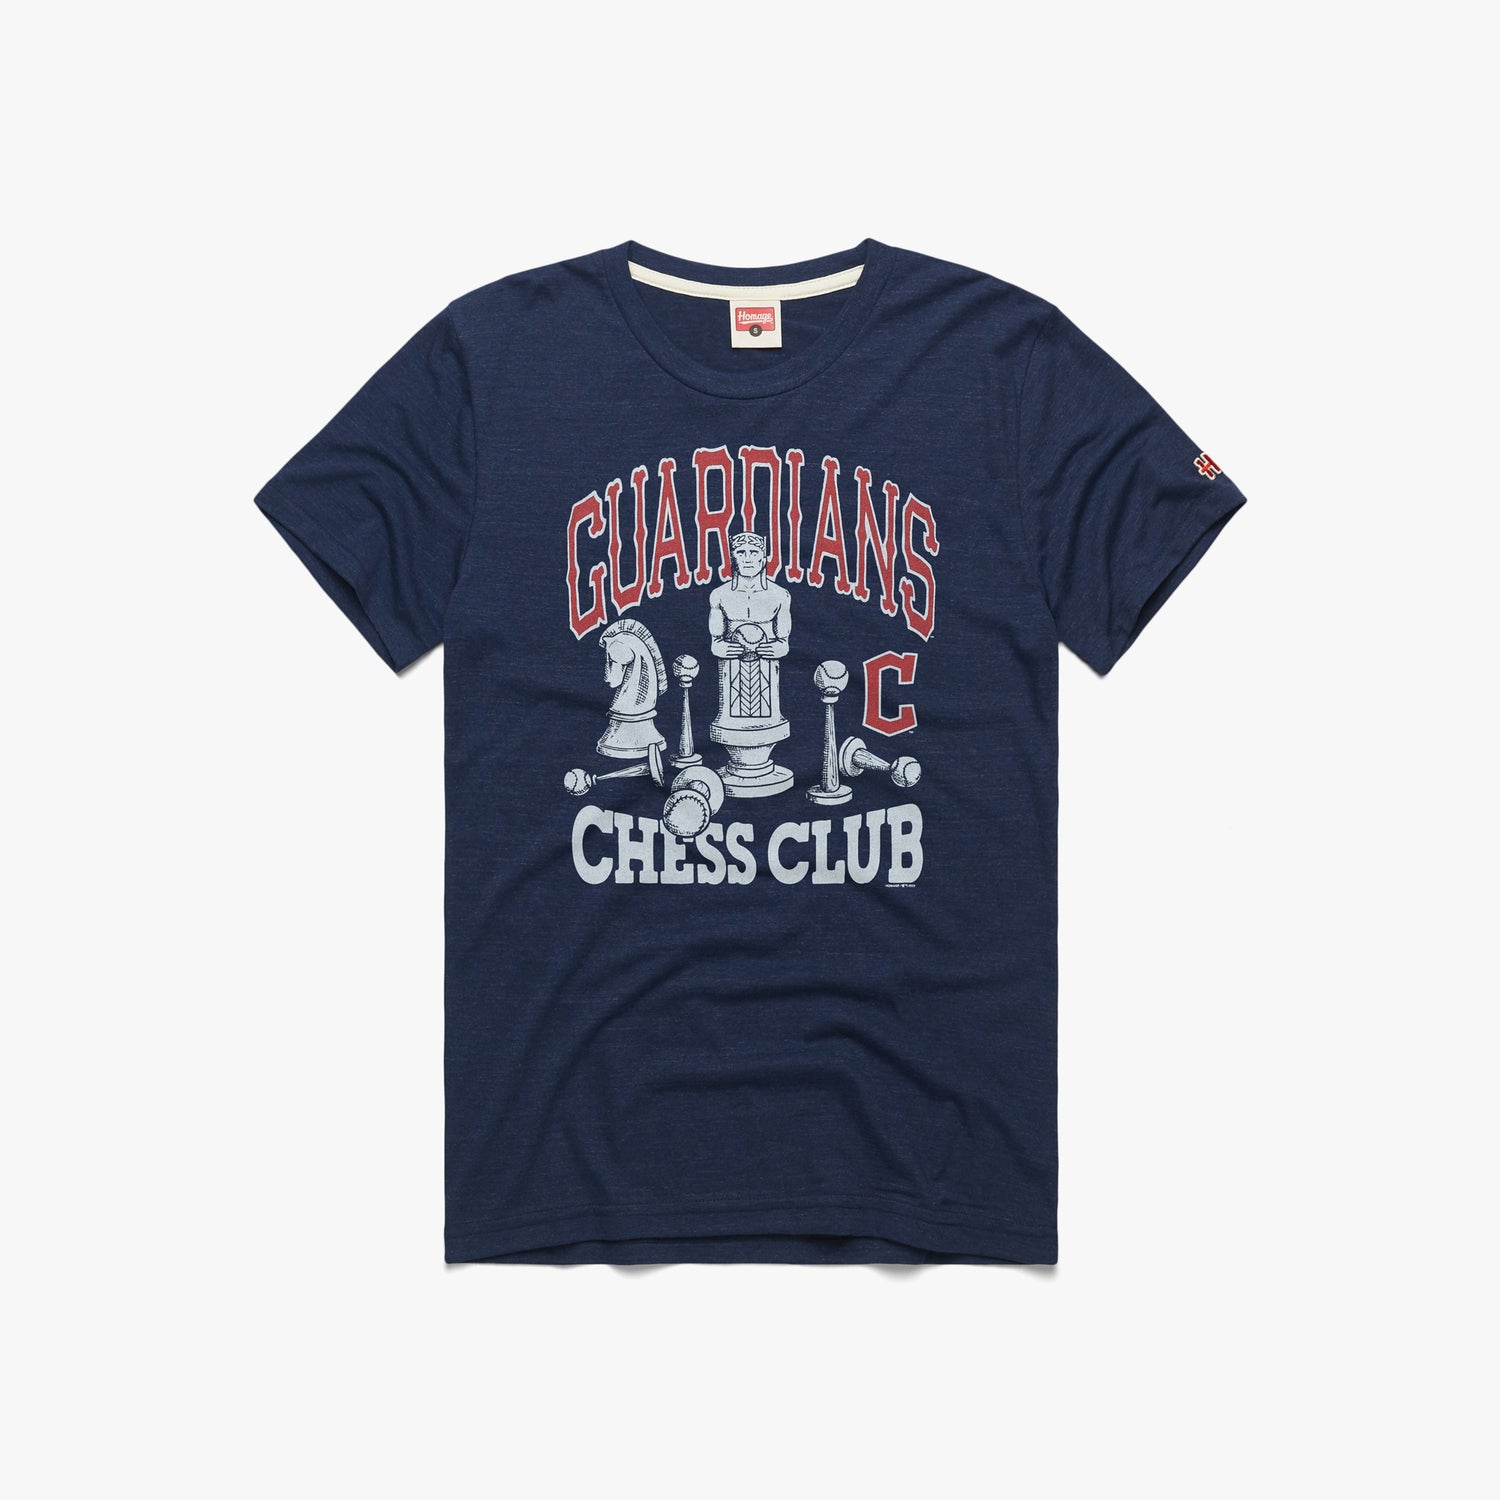 youth cleveland guardians jersey